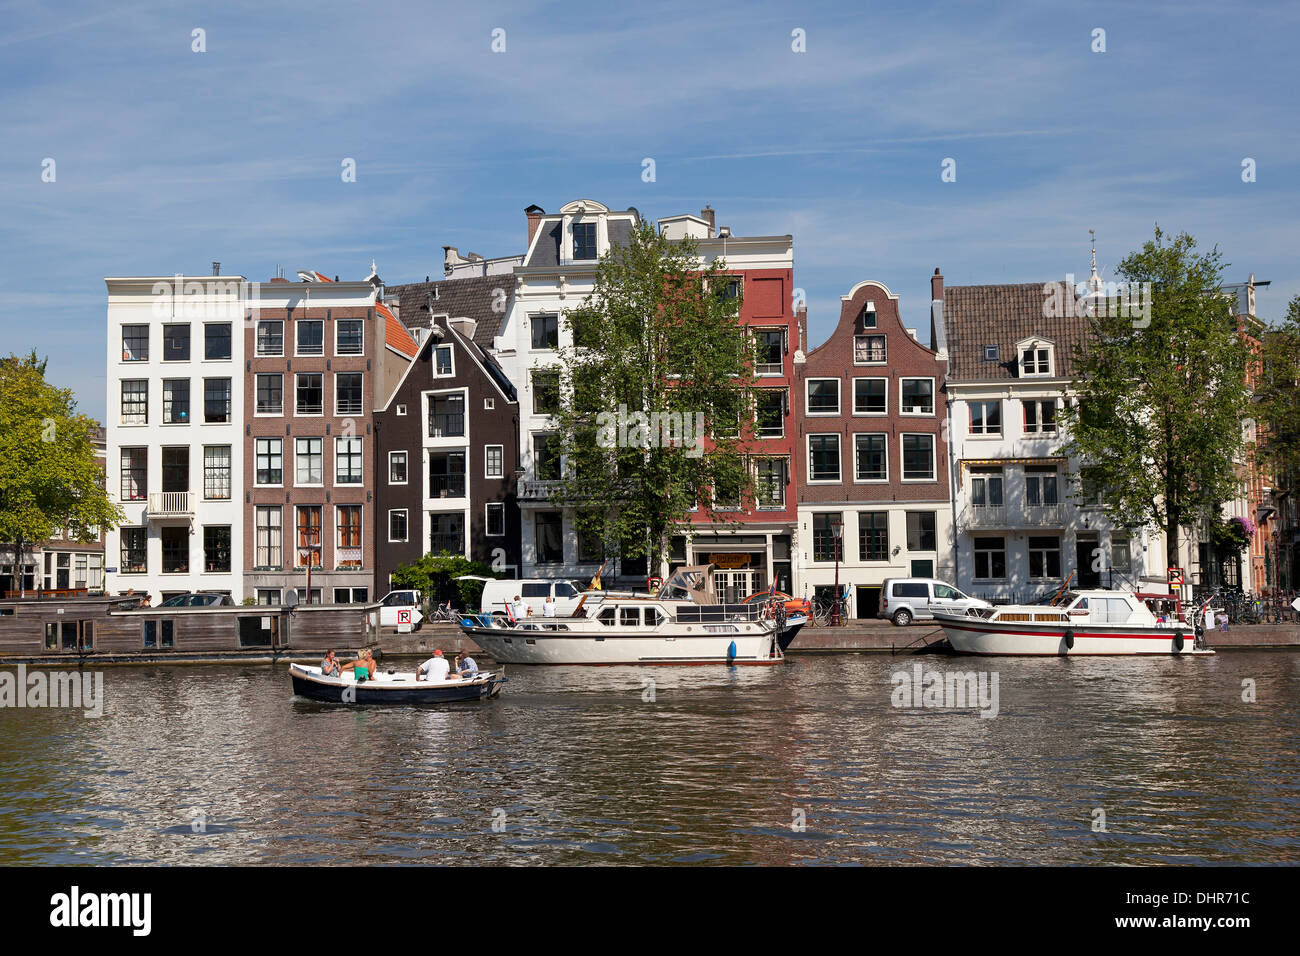 Boating in a canal in Amsterdam with facades of Dutch townhouses Stock Photo